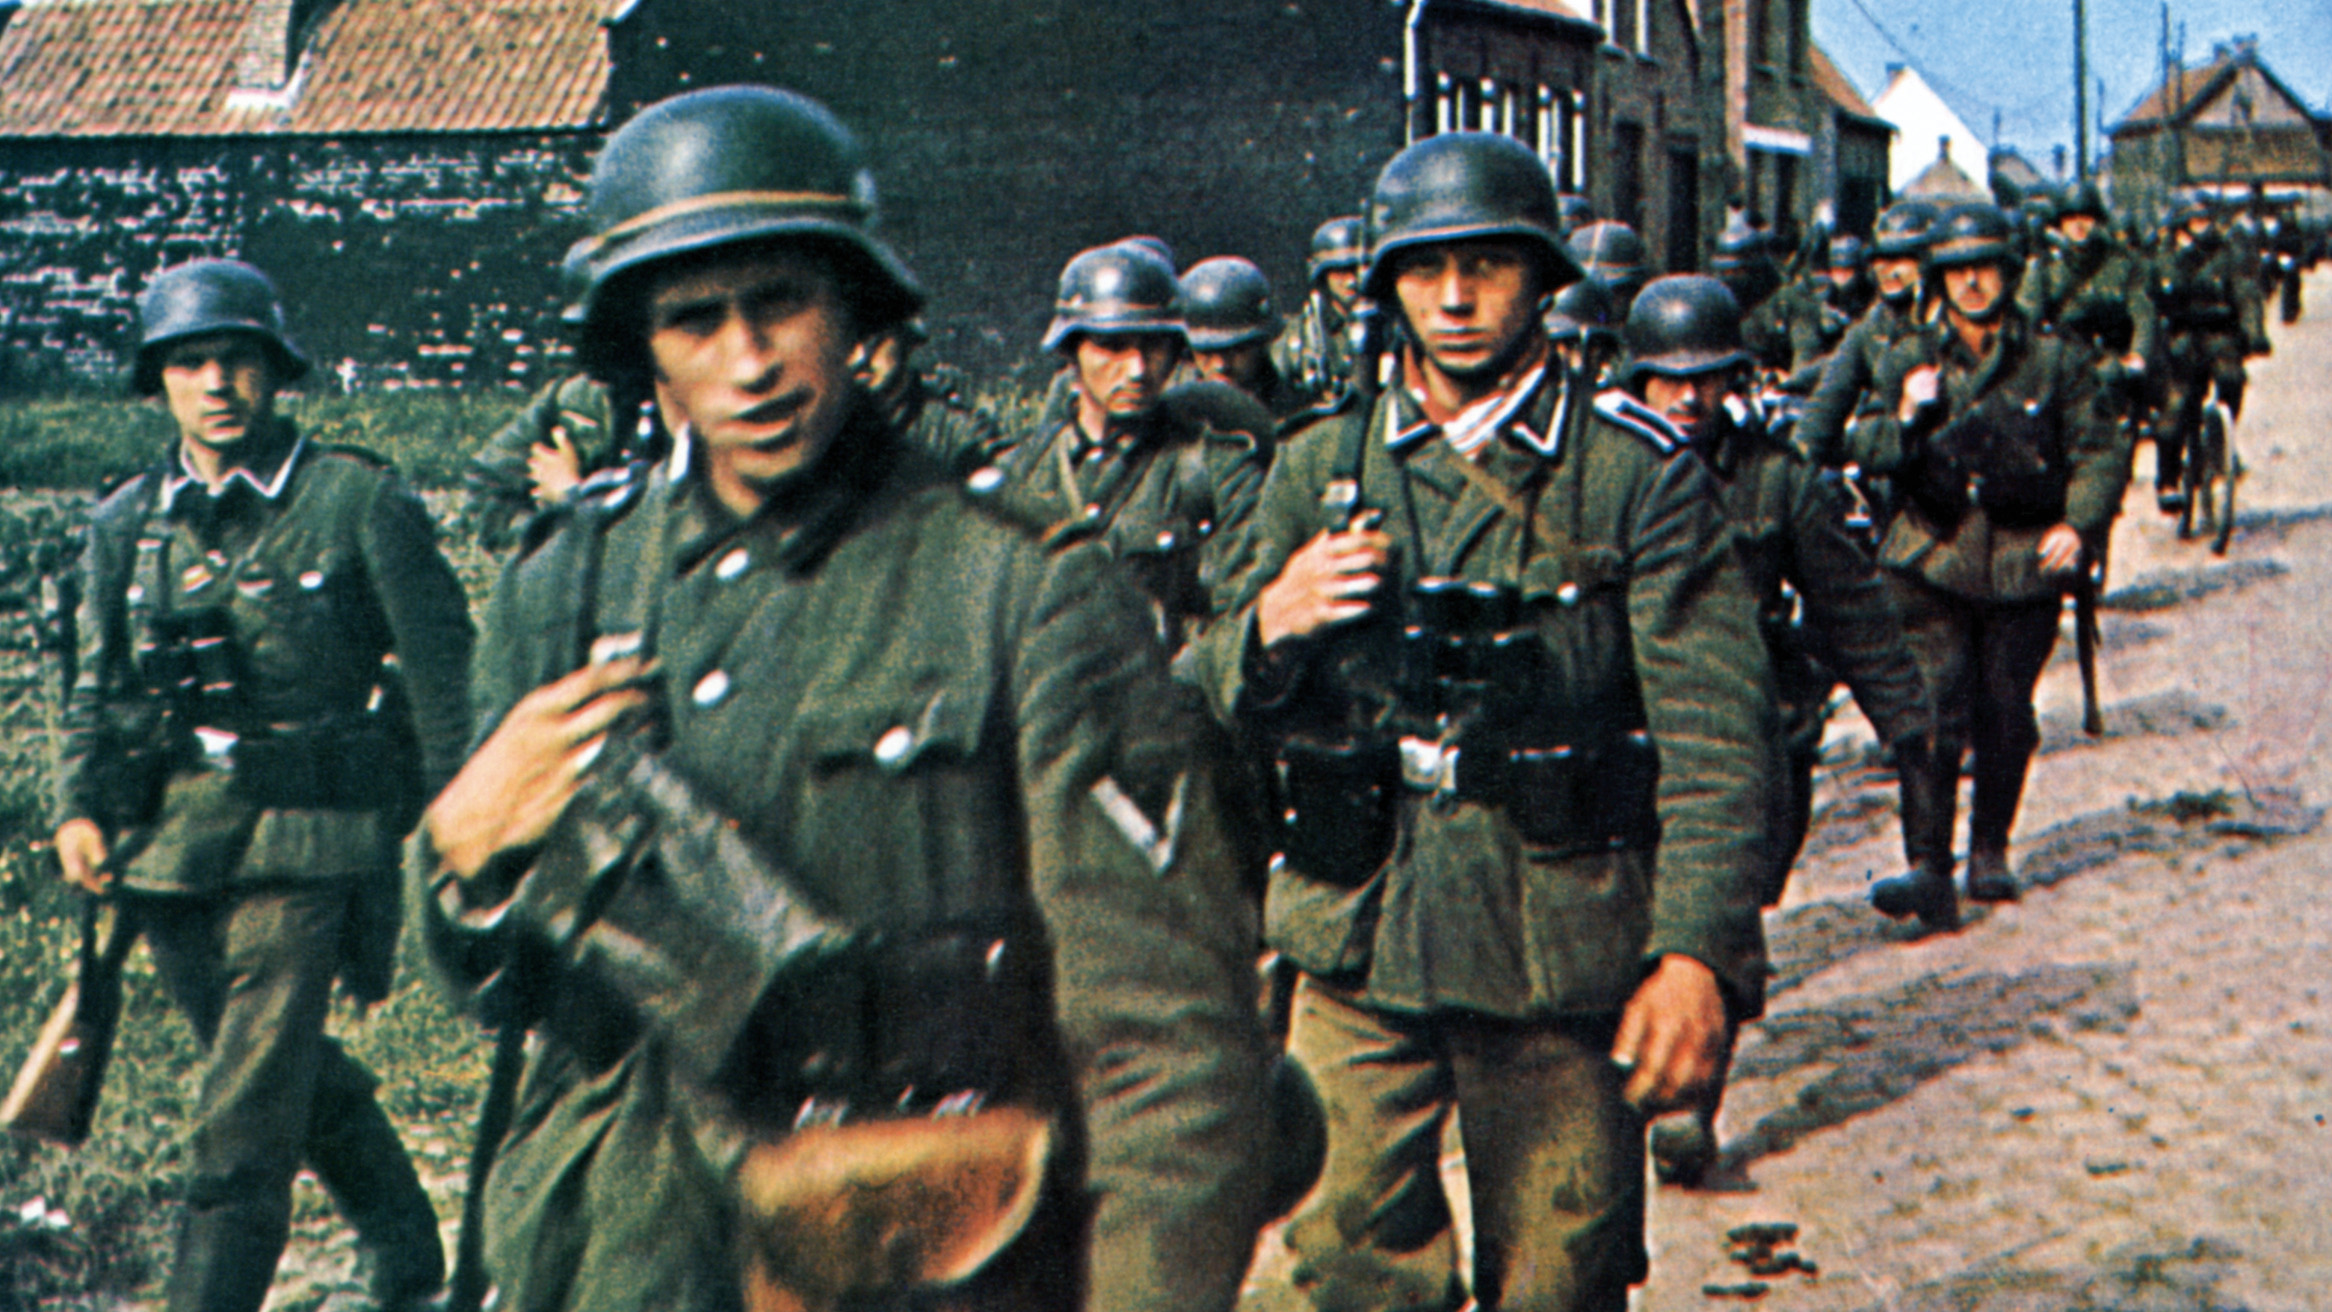 Wehrmacht infantrymen march through a Belgian town to occupy territory overrun by armored divisions.